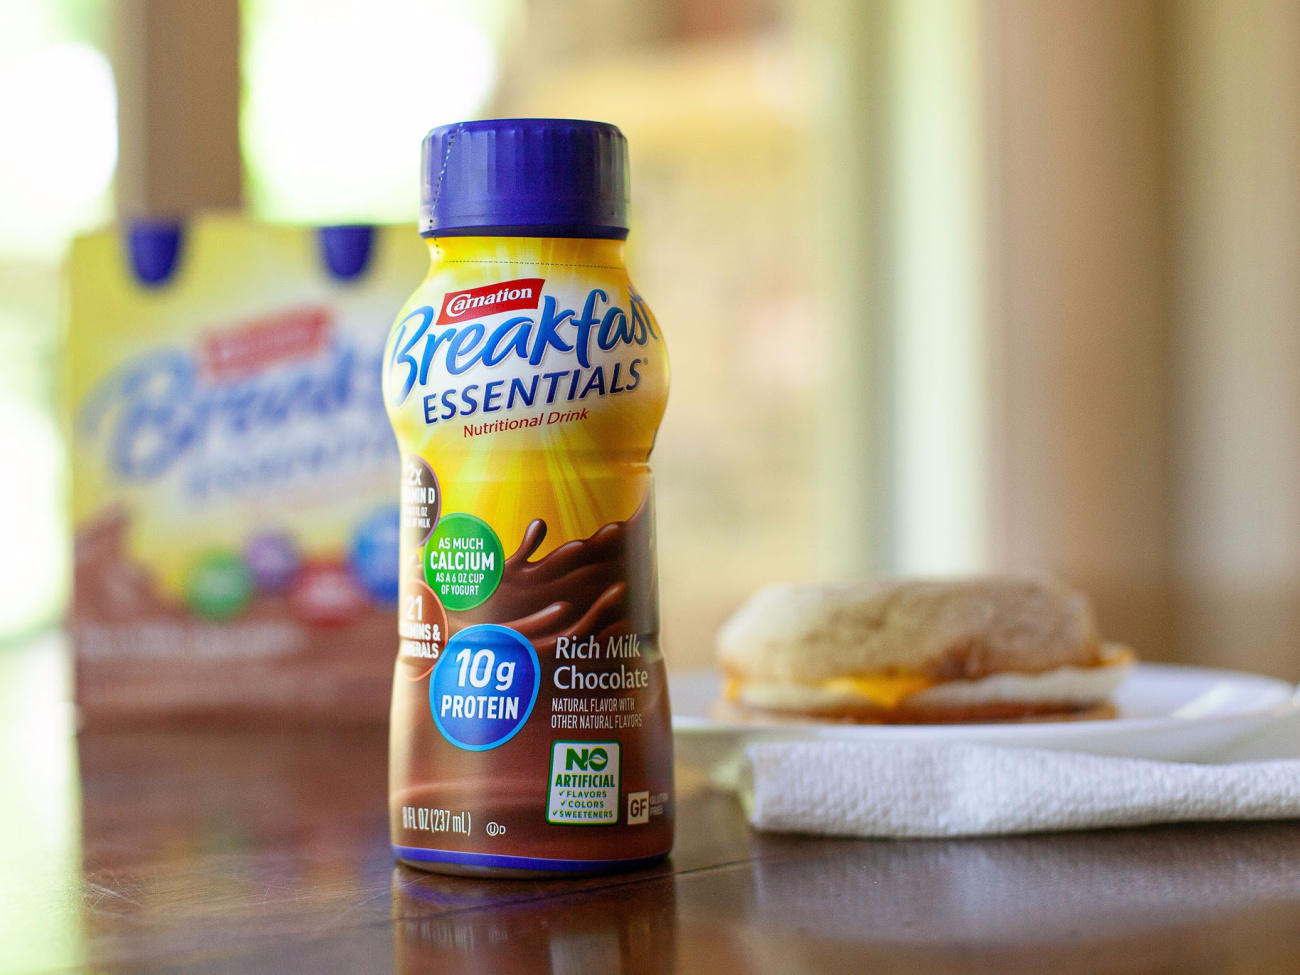 Start Your Day With Great Taste And Save On Carnation Breakfast Essentials® Now At Publix on I Heart Publix